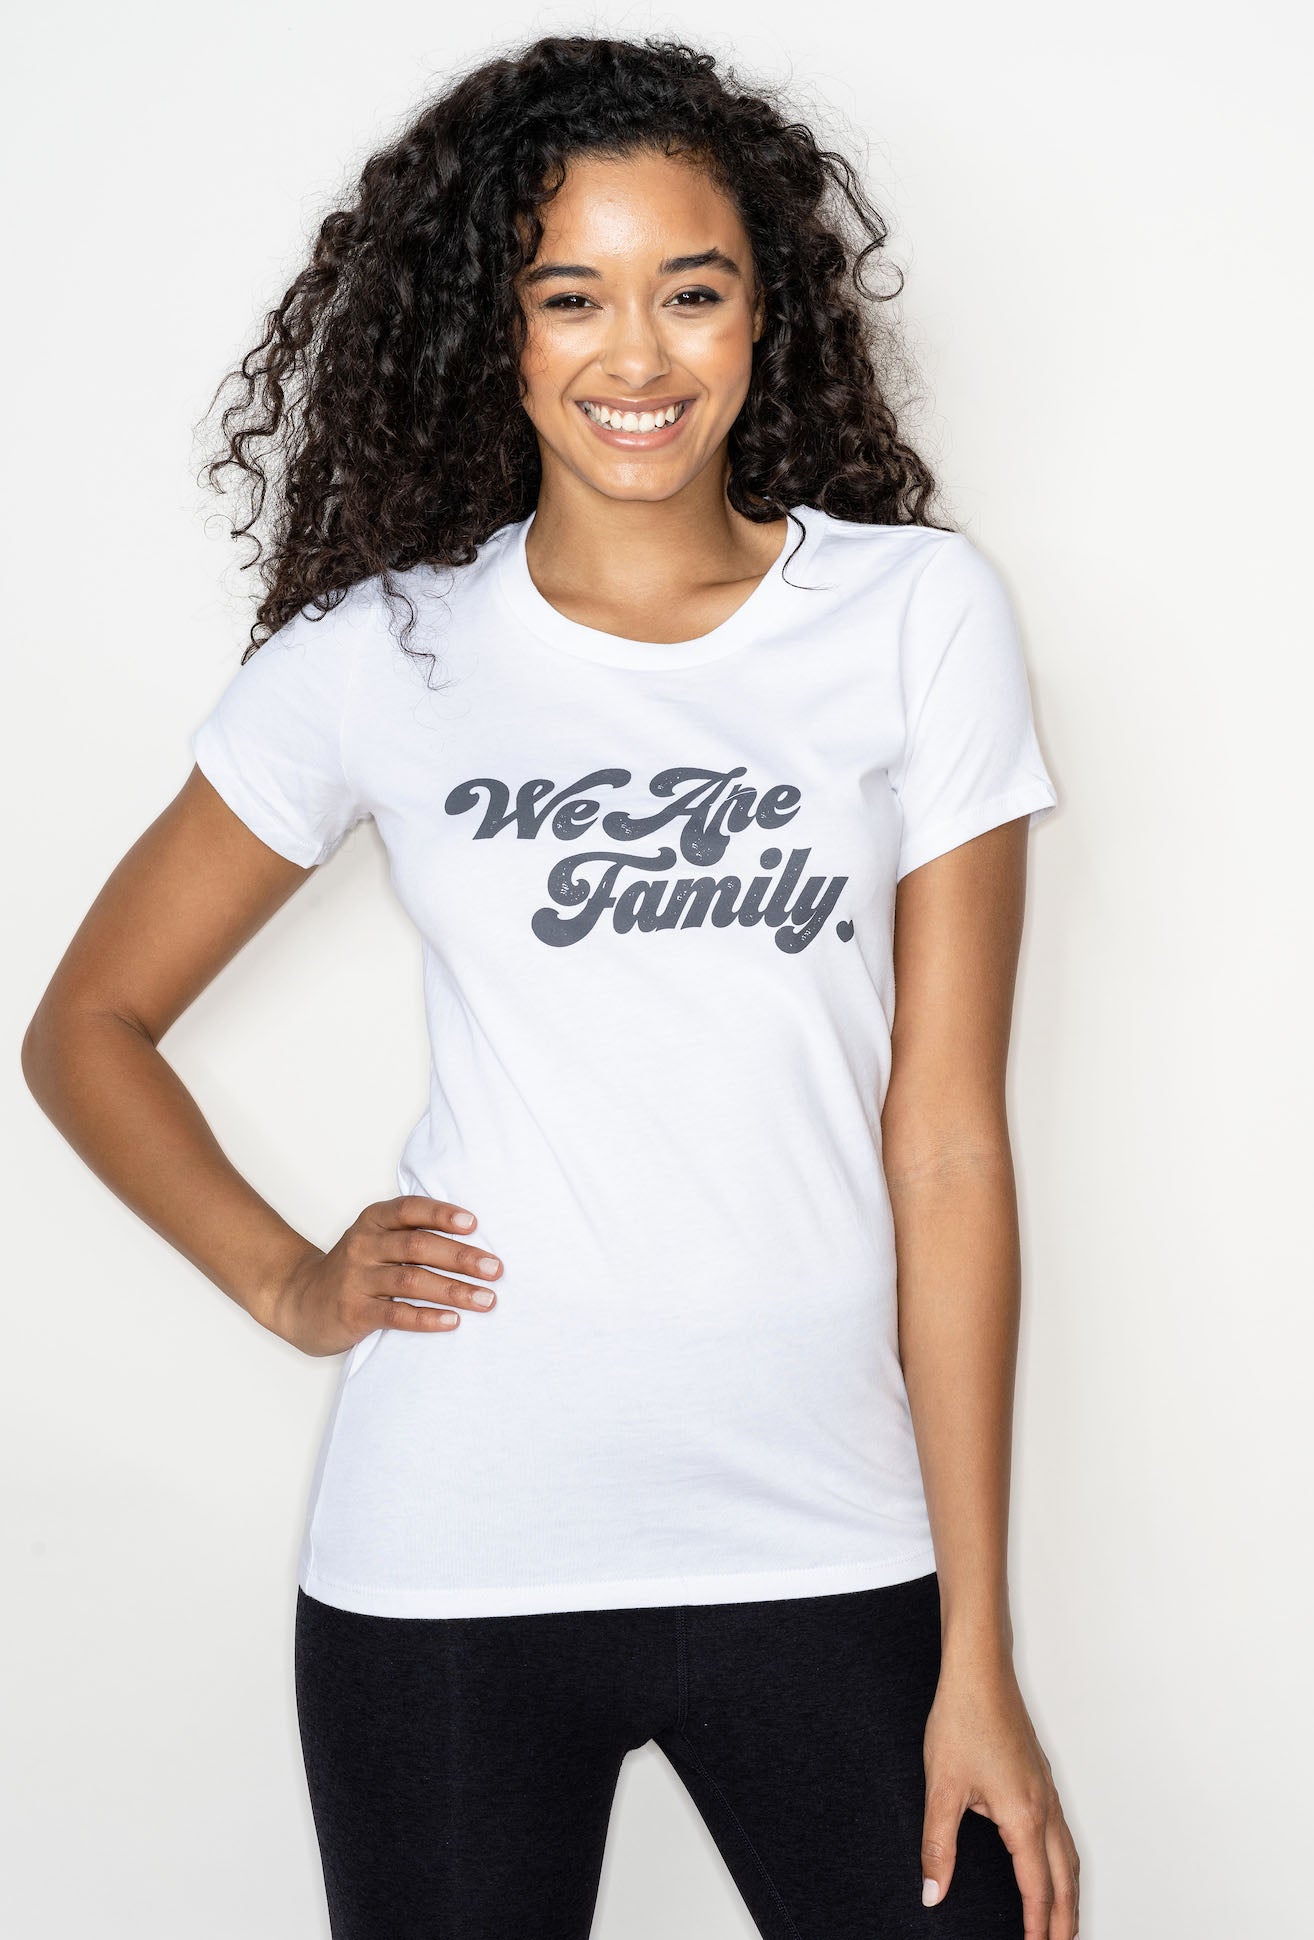 We Are Family' - white - supporting 'Doctors Without Borders